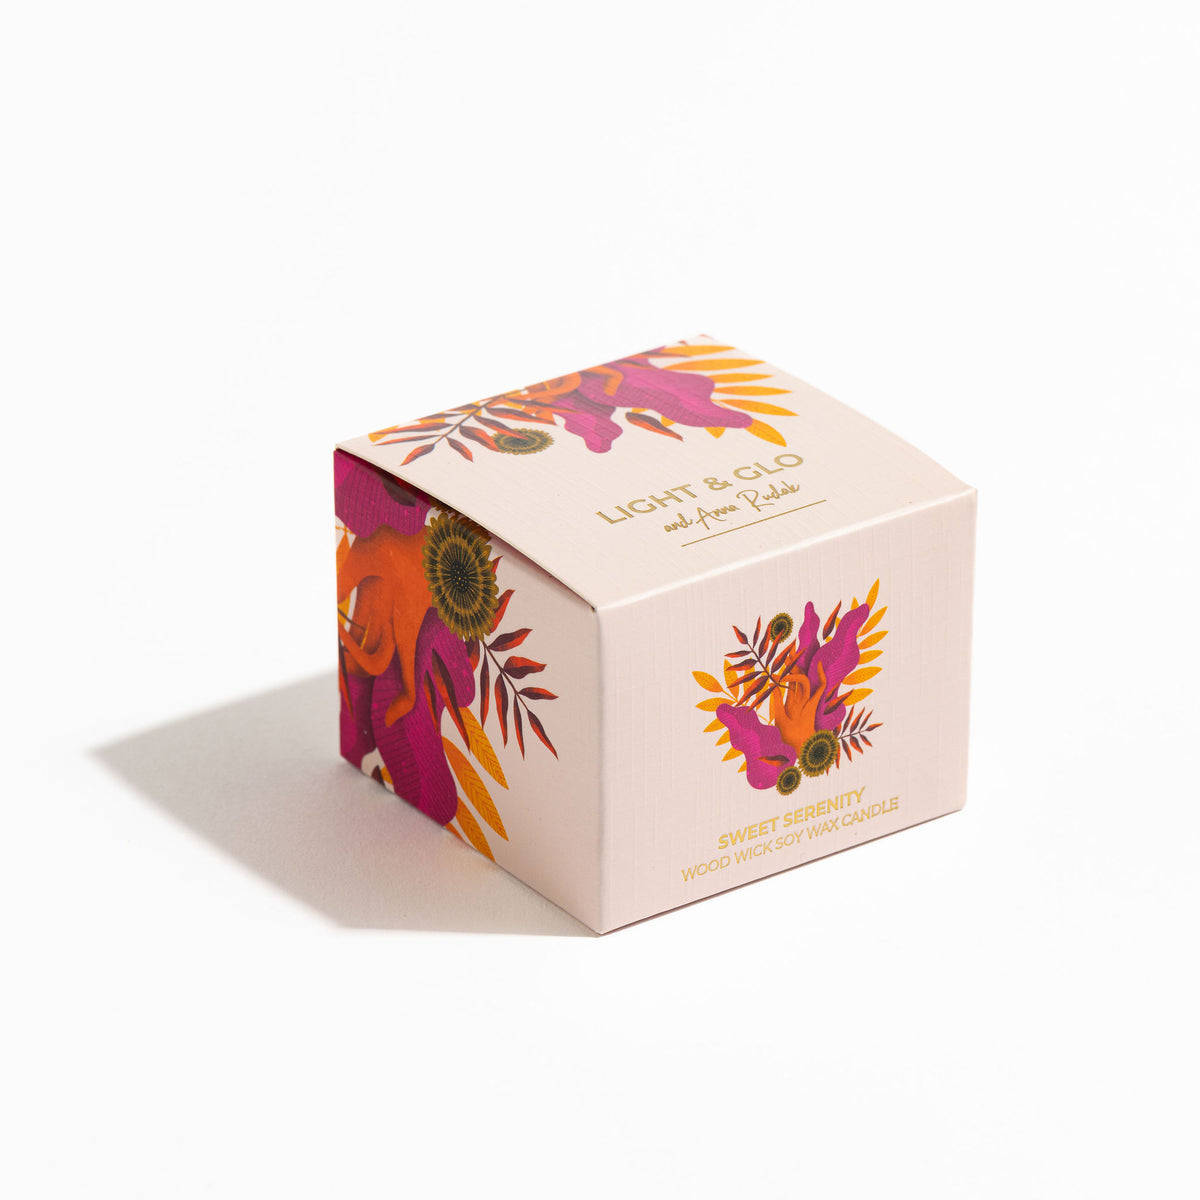 Sweet Serenity - Artist Travel Candle | Luxury Candles &amp; Home Fragrances by Light + Glo